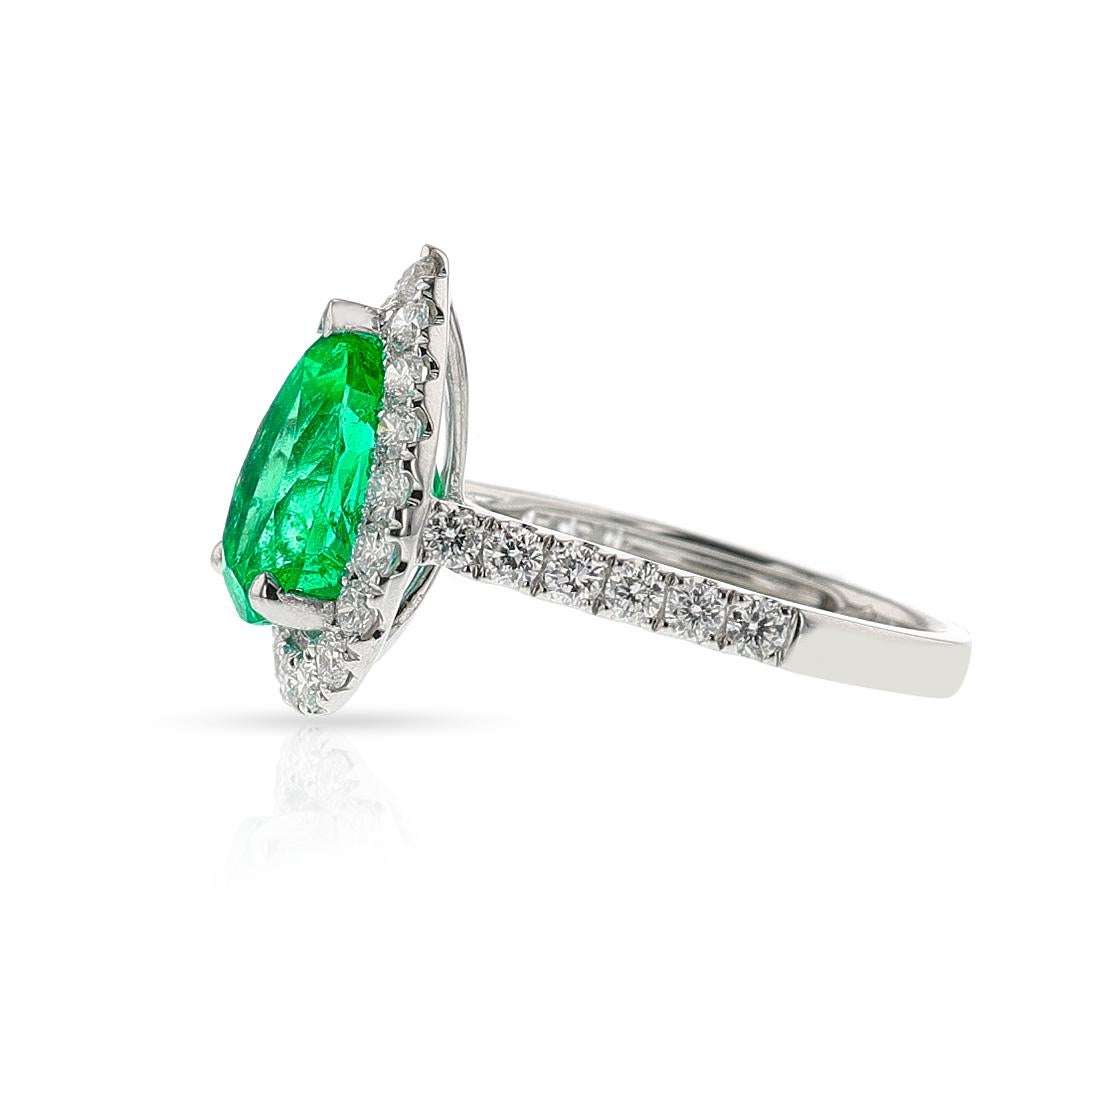 GIA Certified 3.68 ct. Colombian Emerald and Diamond Ring, 18k 3